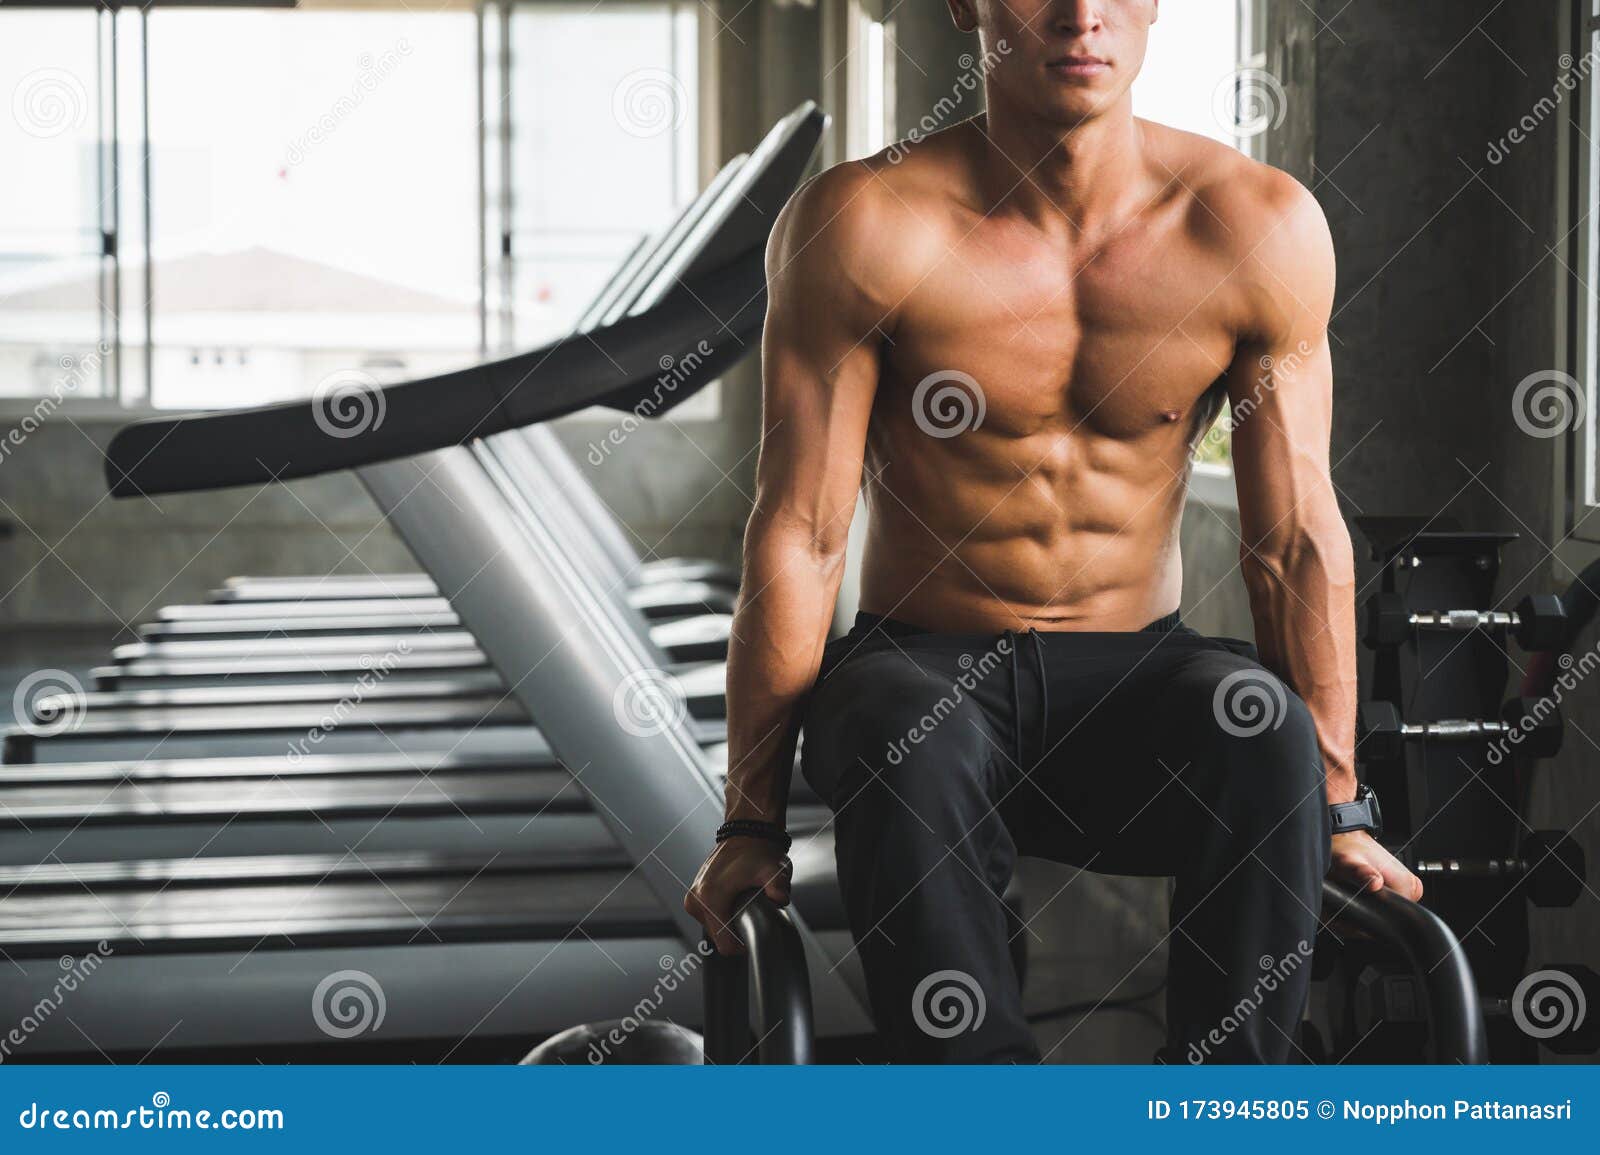 Muscular Man Working Out In Gym Doing Exercises With 